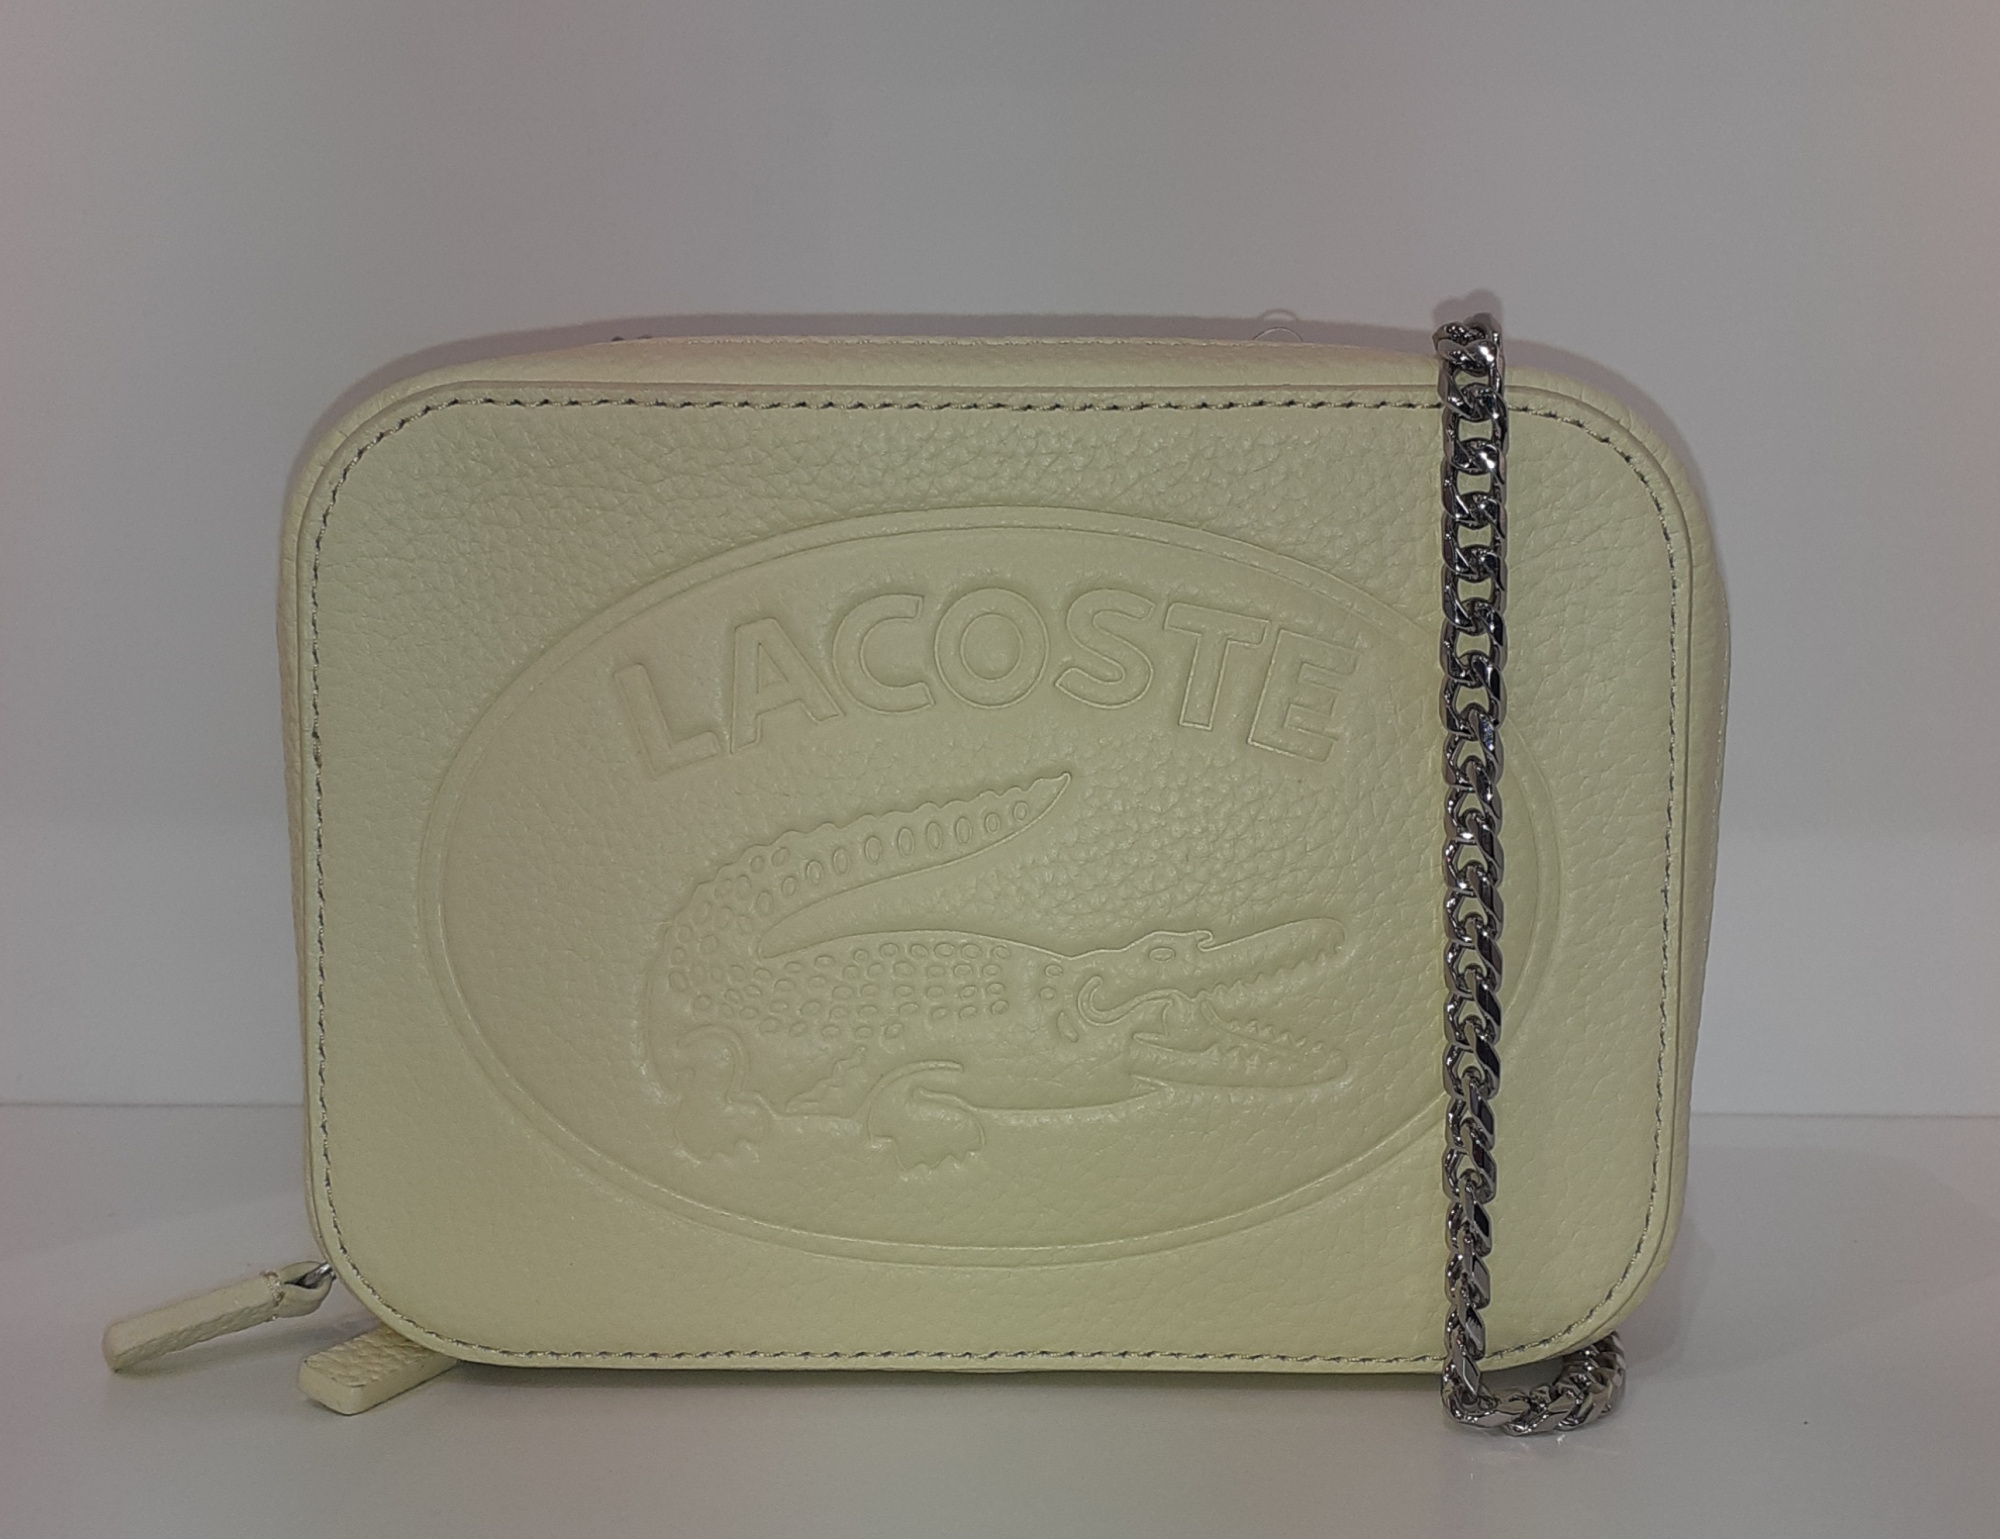 LACOSTE CROSSOVER Ref NF2970NL 13x18x6 cm